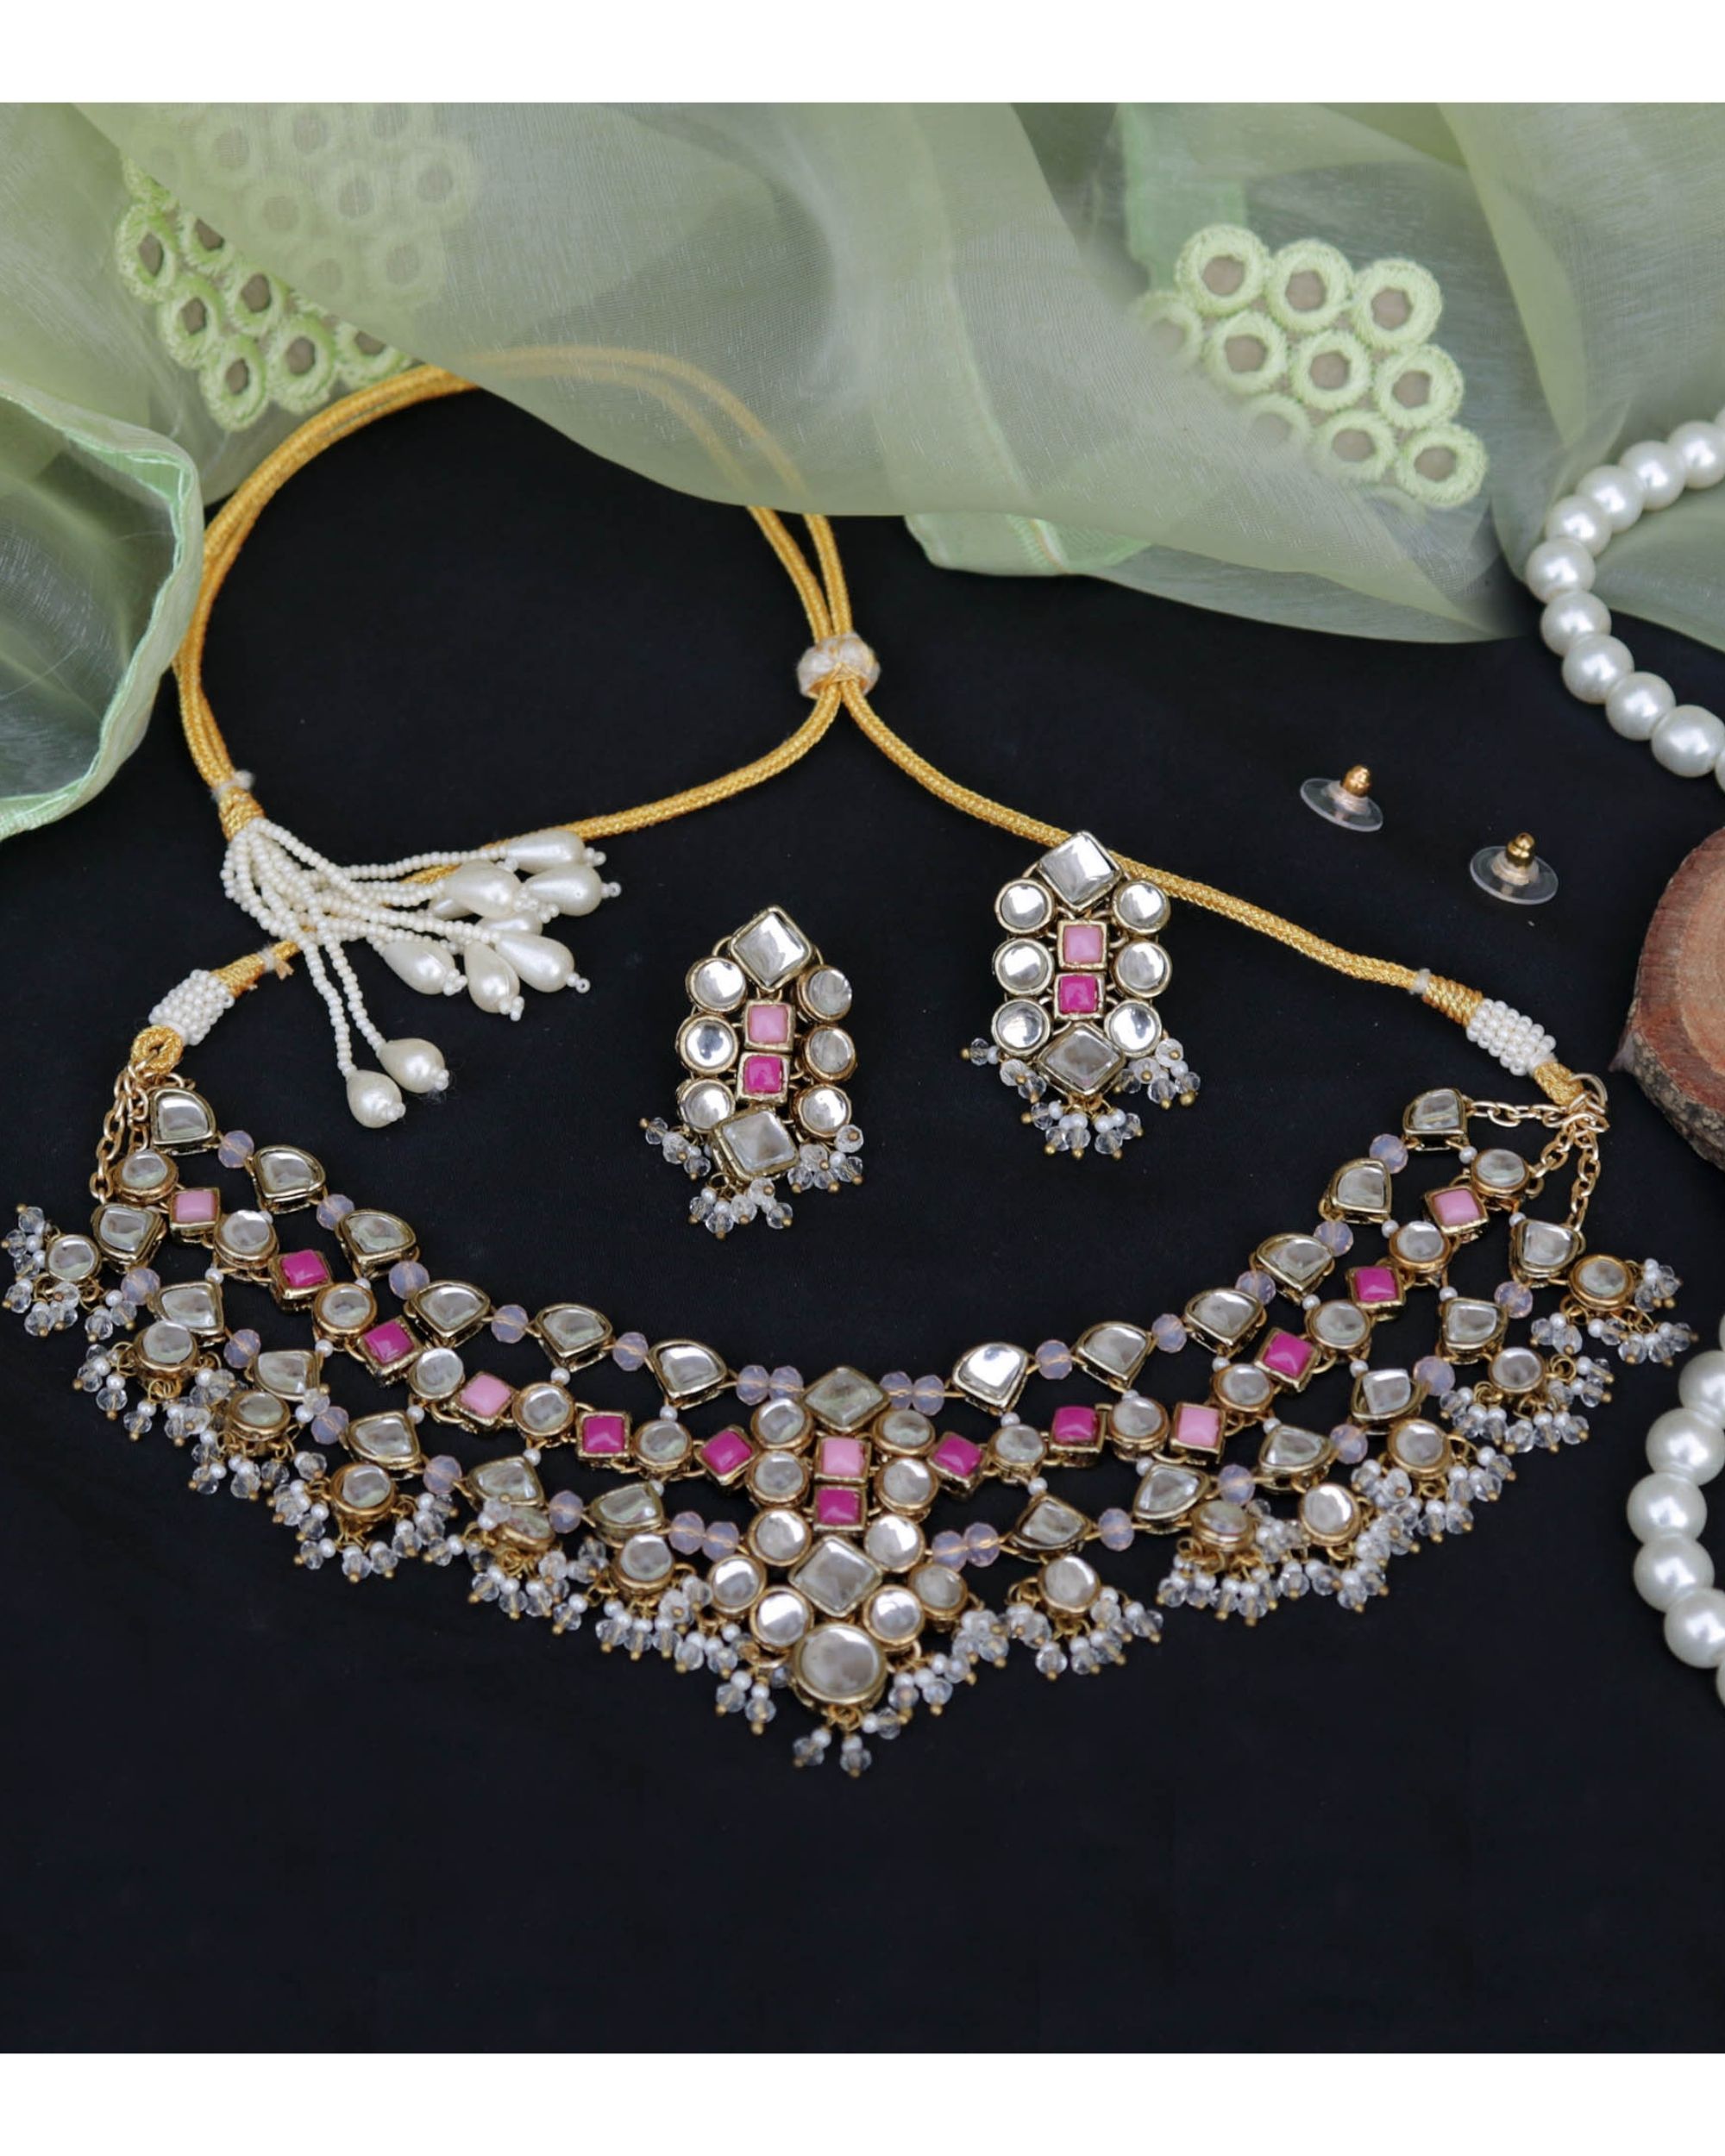 Dual pink pearl beaded tiered neckpiece with earrings - set of two